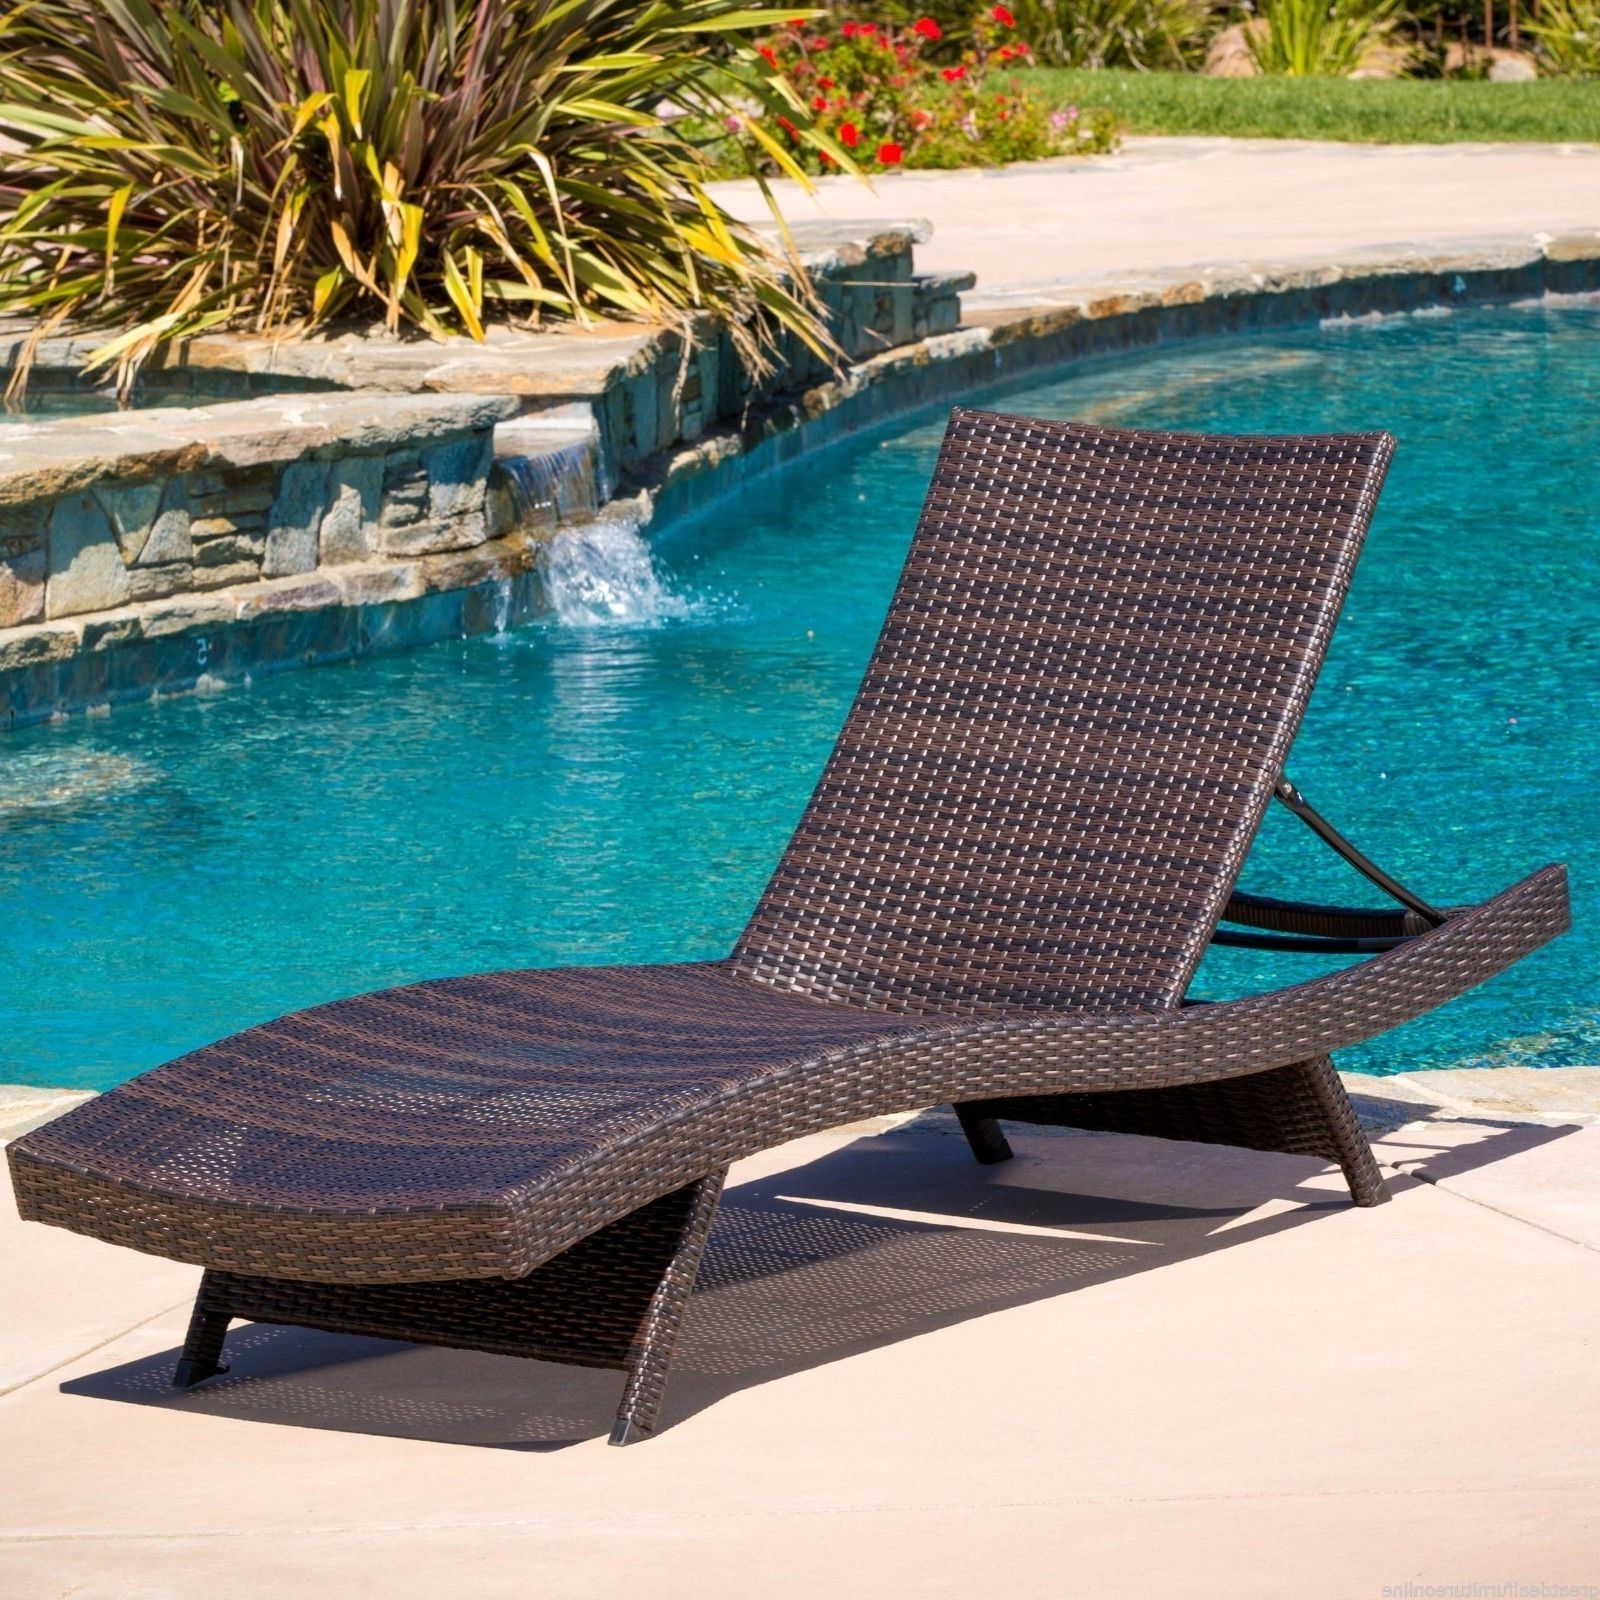 Famous Floating Pool Chaise Lounge Chairs • Lounge Chairs Ideas With Regard To Lakeport Outdoor Adjustable Chaise Lounge Chairs (View 1 of 15)